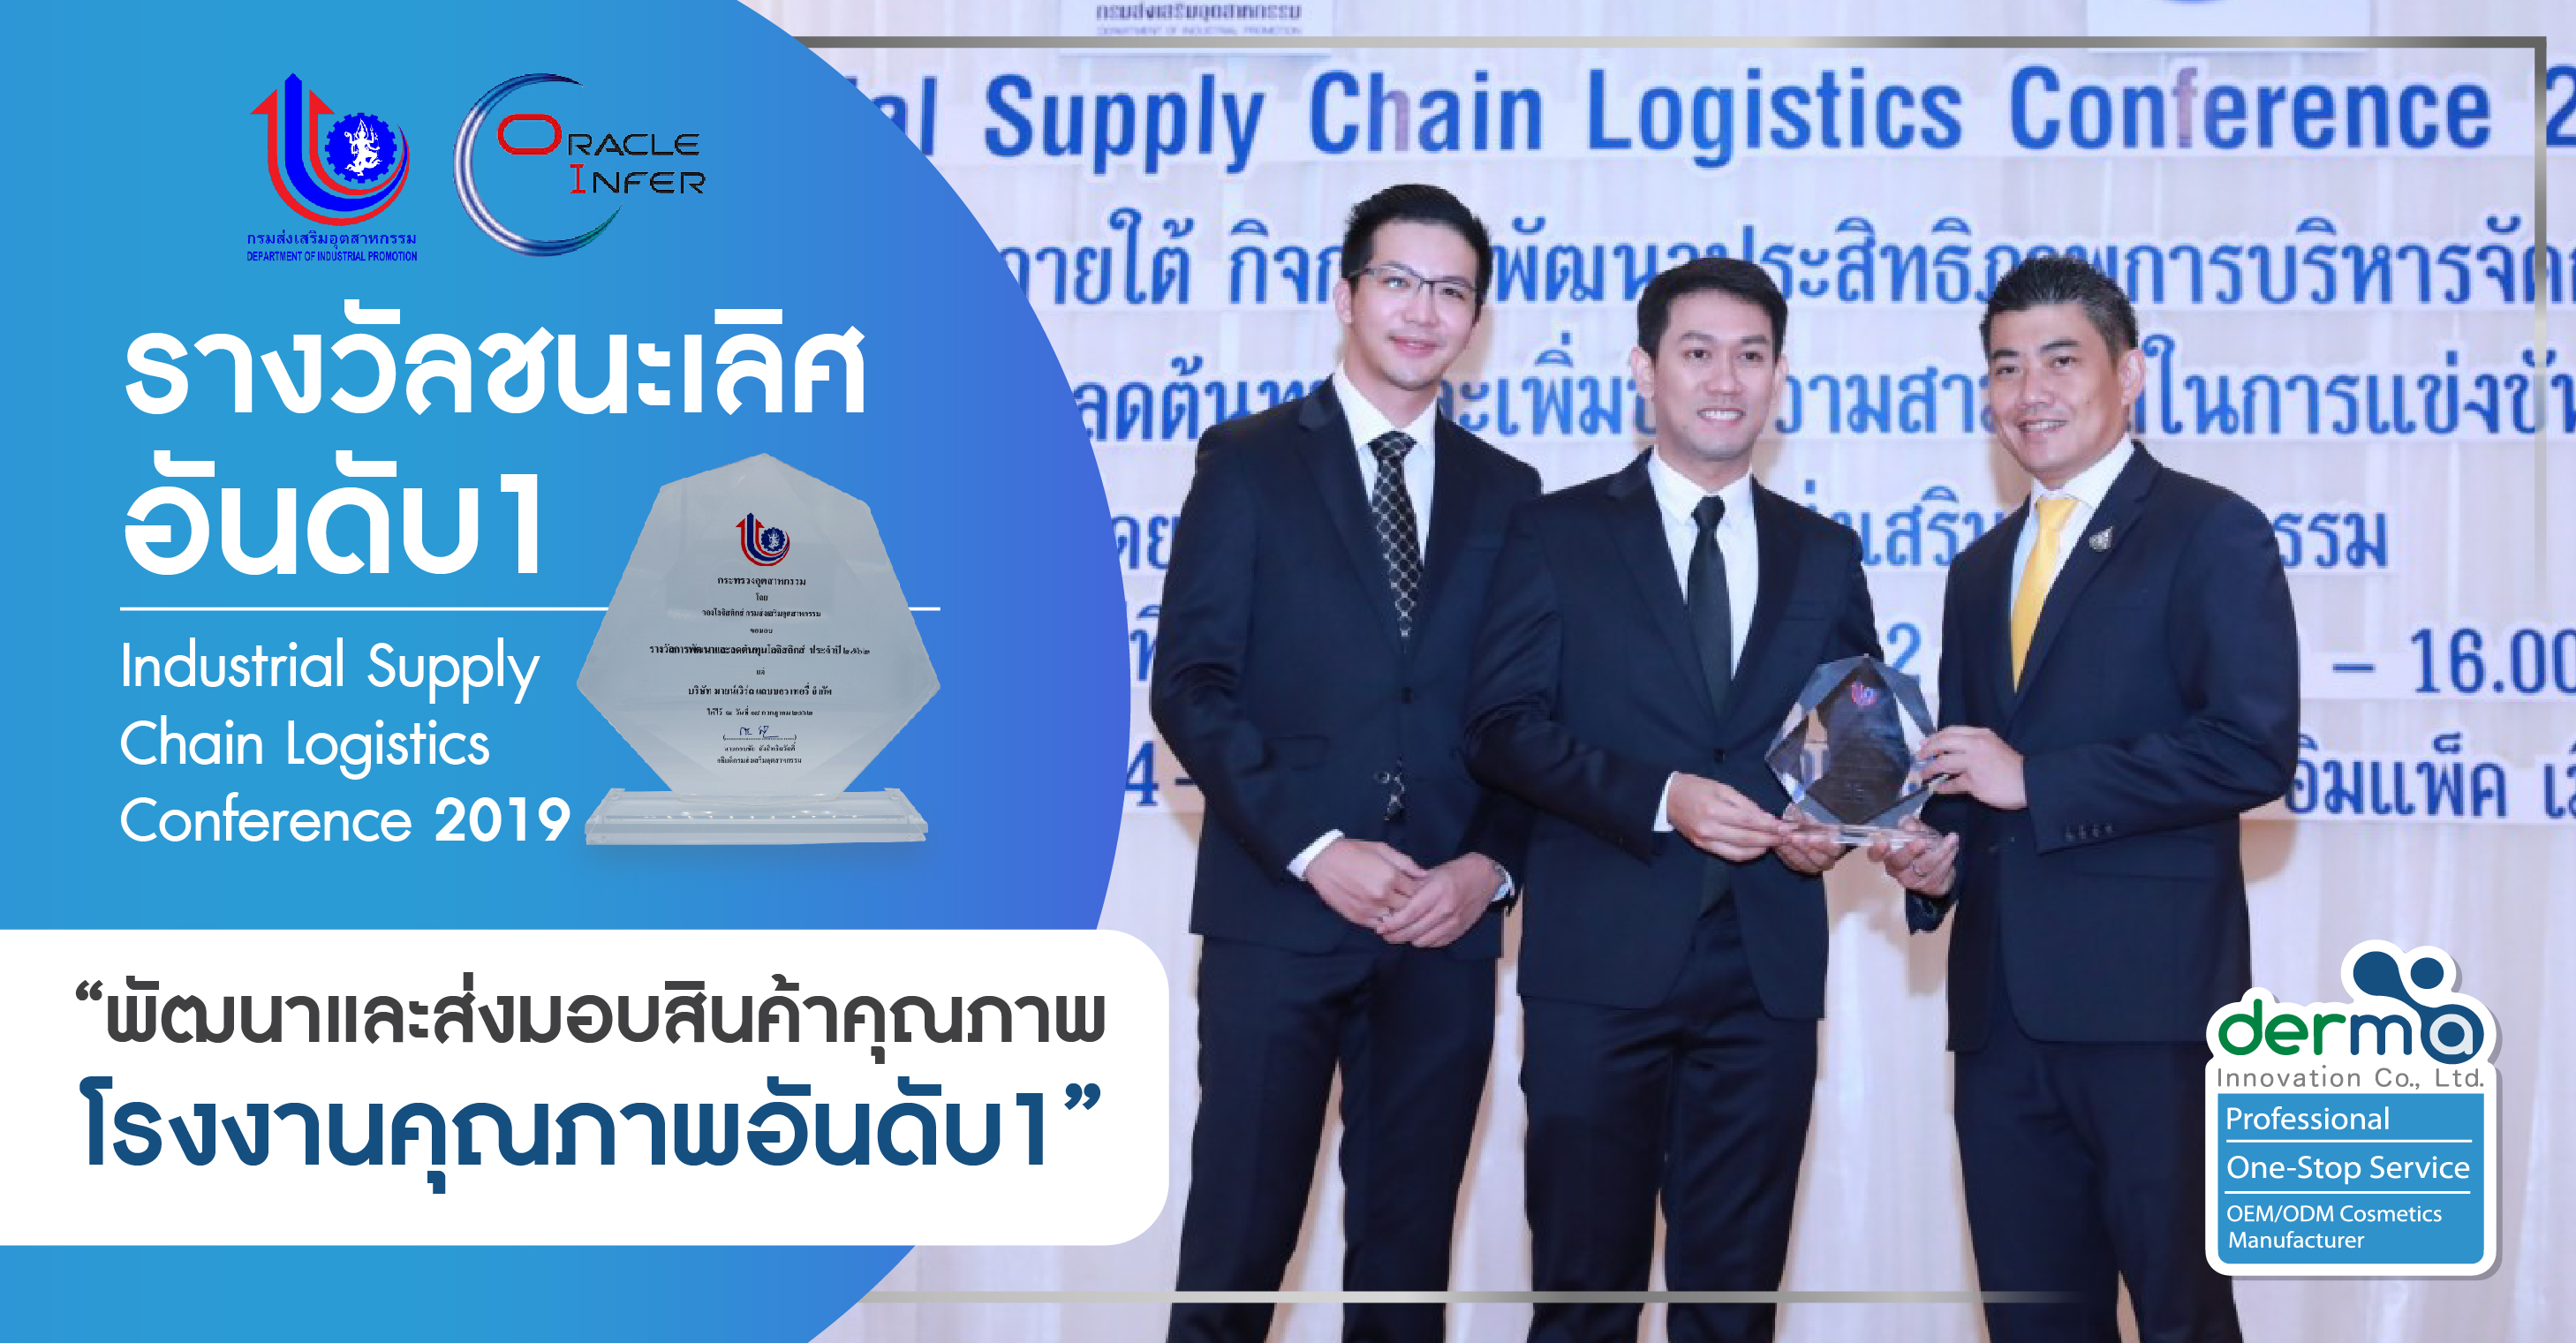 Derma Innovation Industrial Supply Chain Logistics Conference 2019